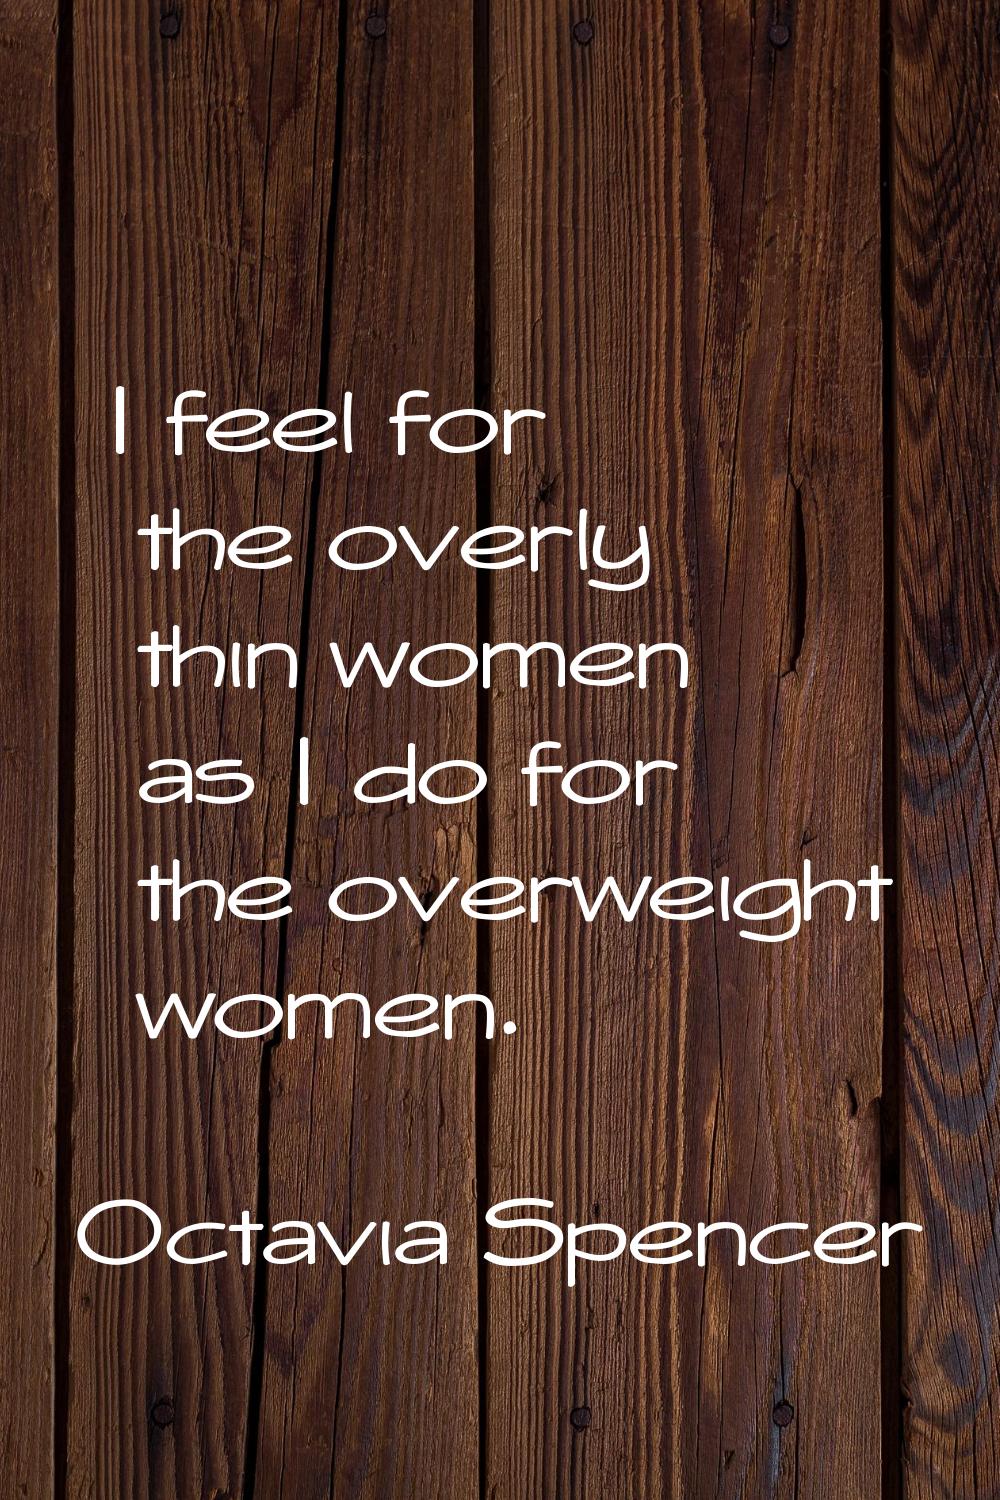 I feel for the overly thin women as I do for the overweight women.